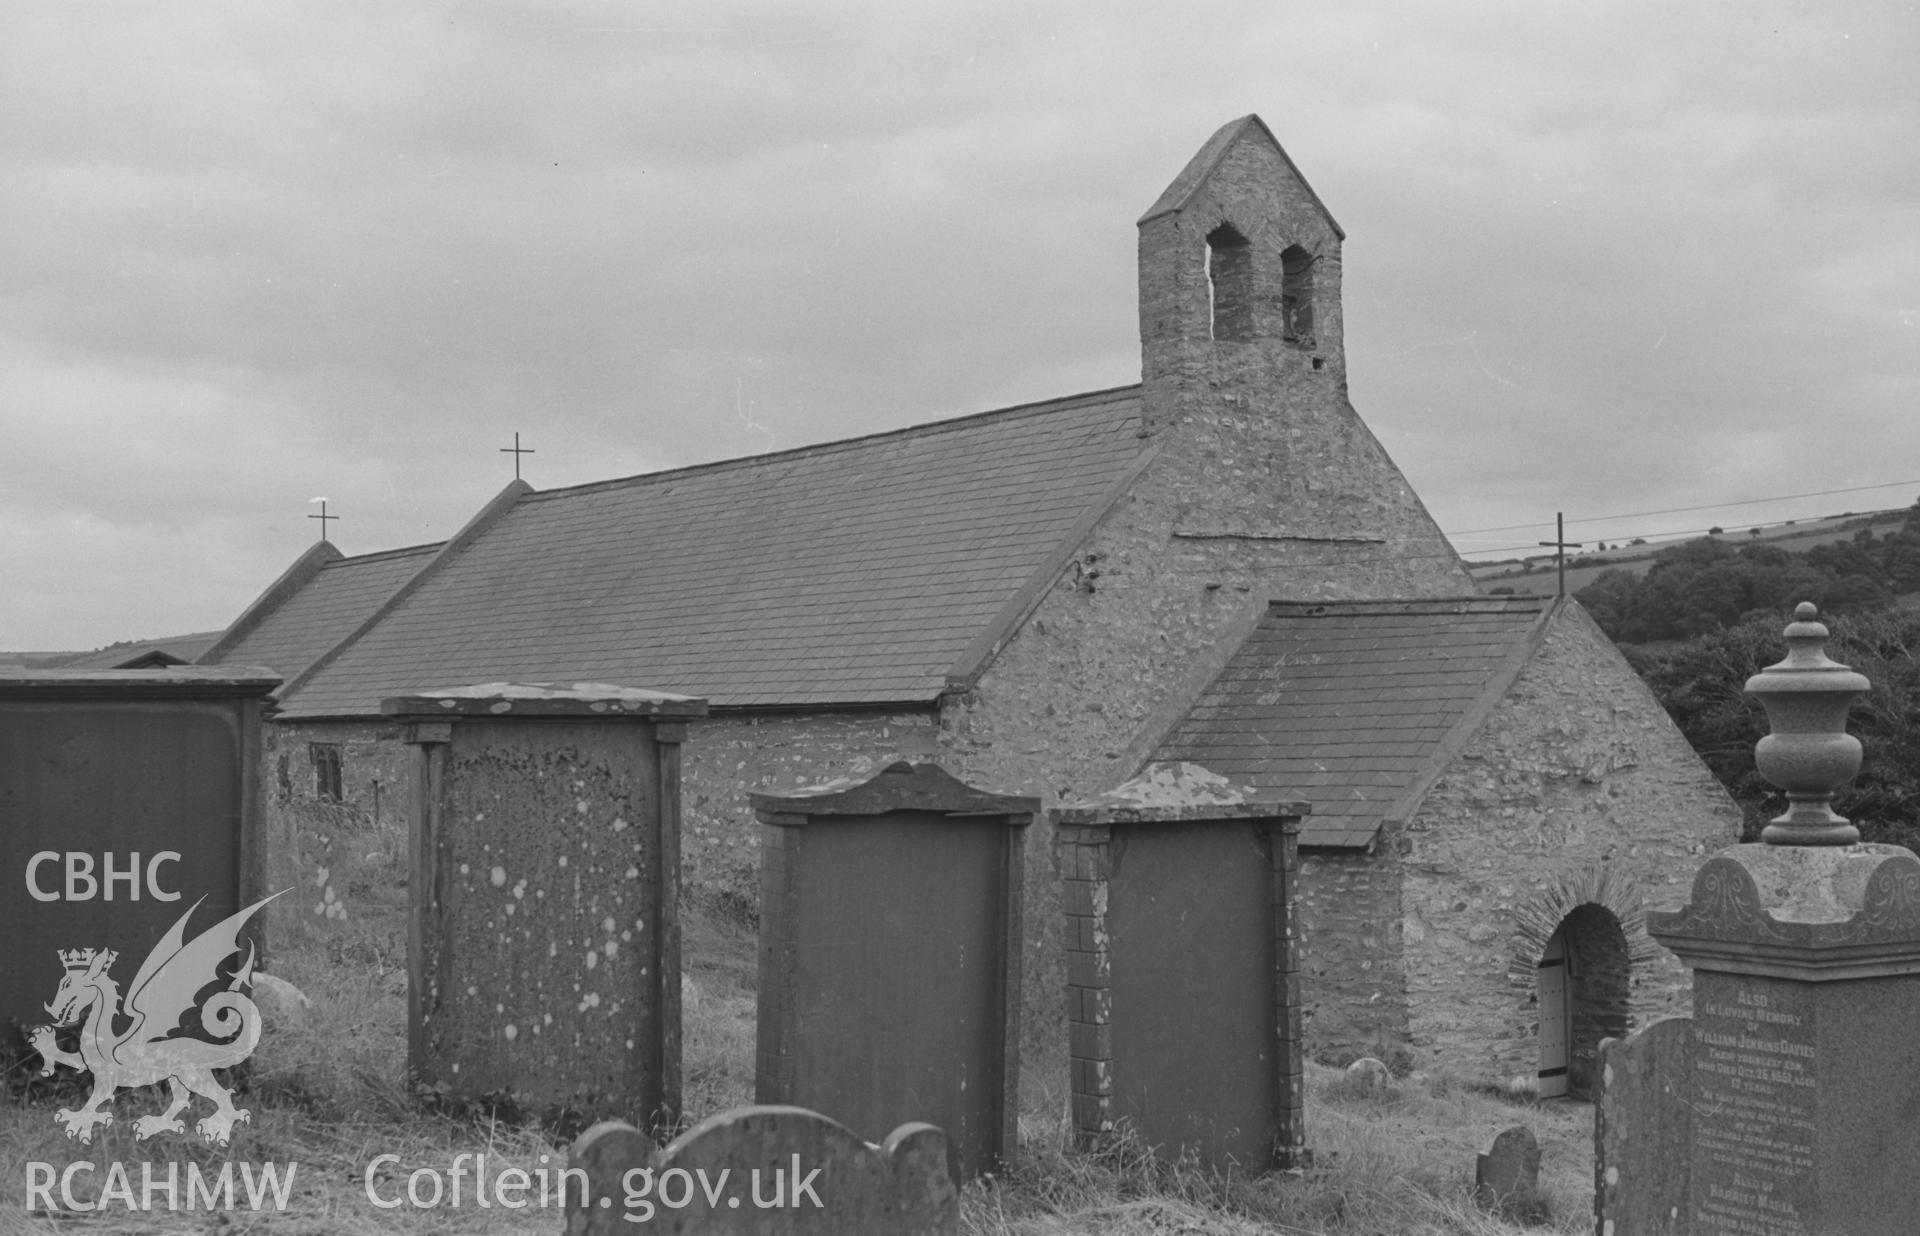 Digital copy of a black and white negative showing exterior view of St. Michael's church, Penbryn. Photographed in August 1963 by Arthur O. Chater from Grid Reference SN 2933 5212, looking east south east.